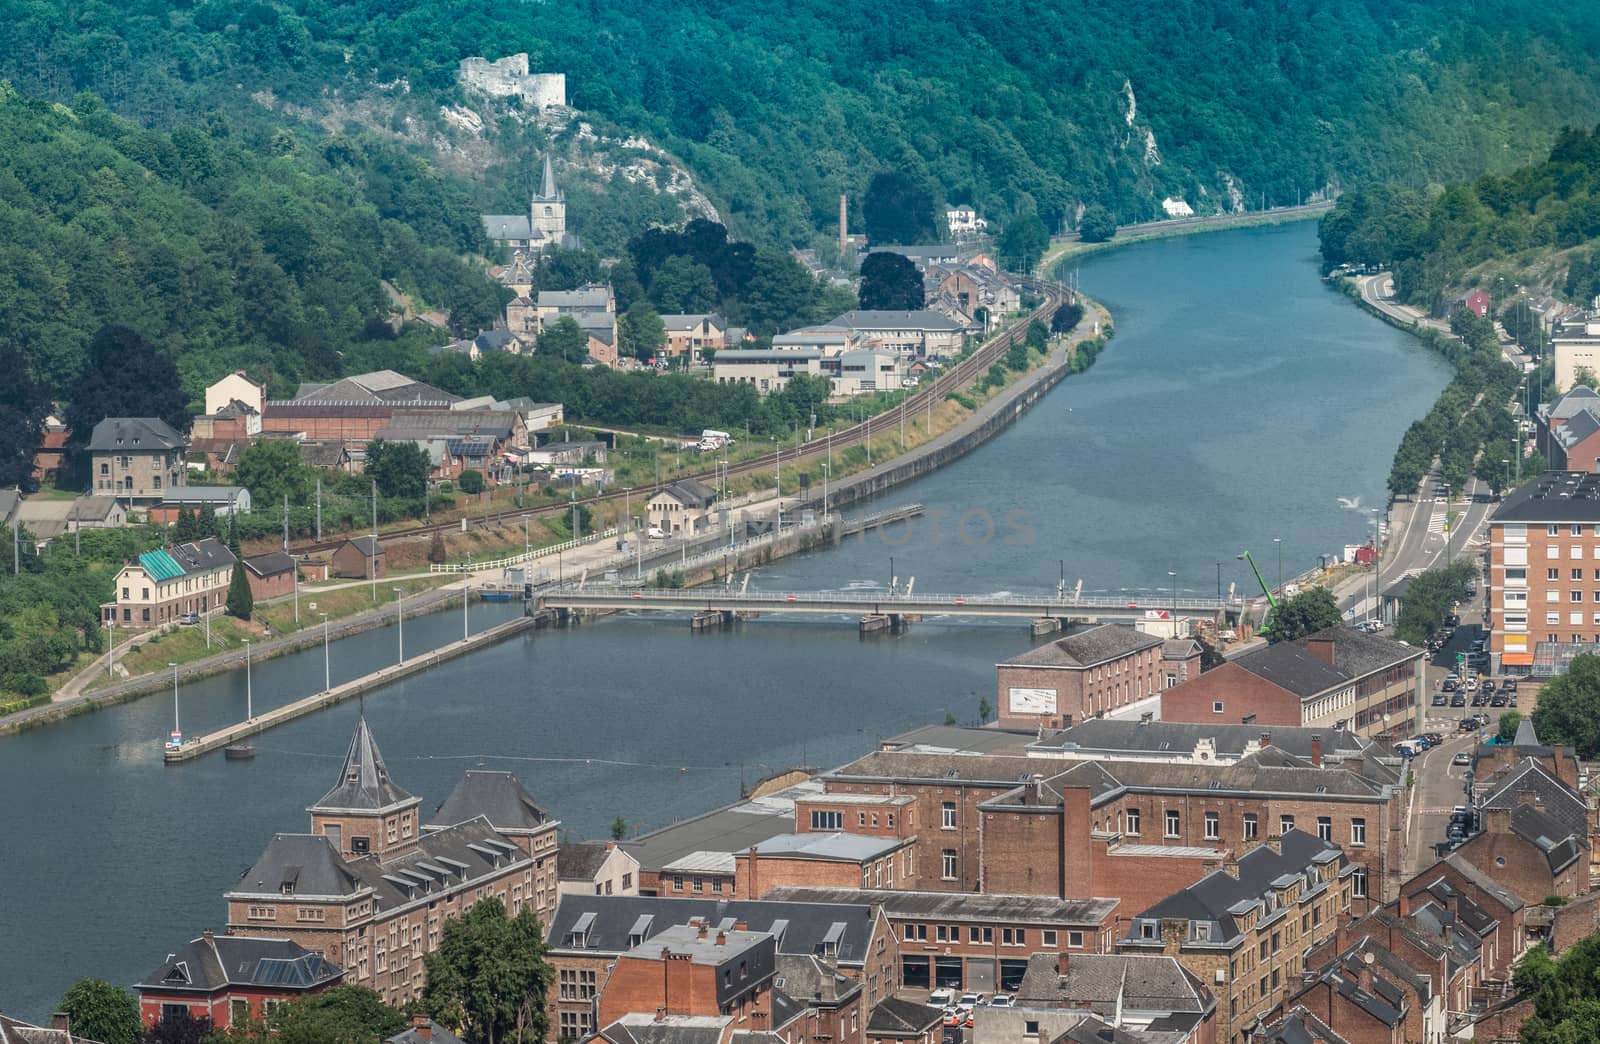 Boat lock on Meuse River in Dinant, Belgium. by Claudine